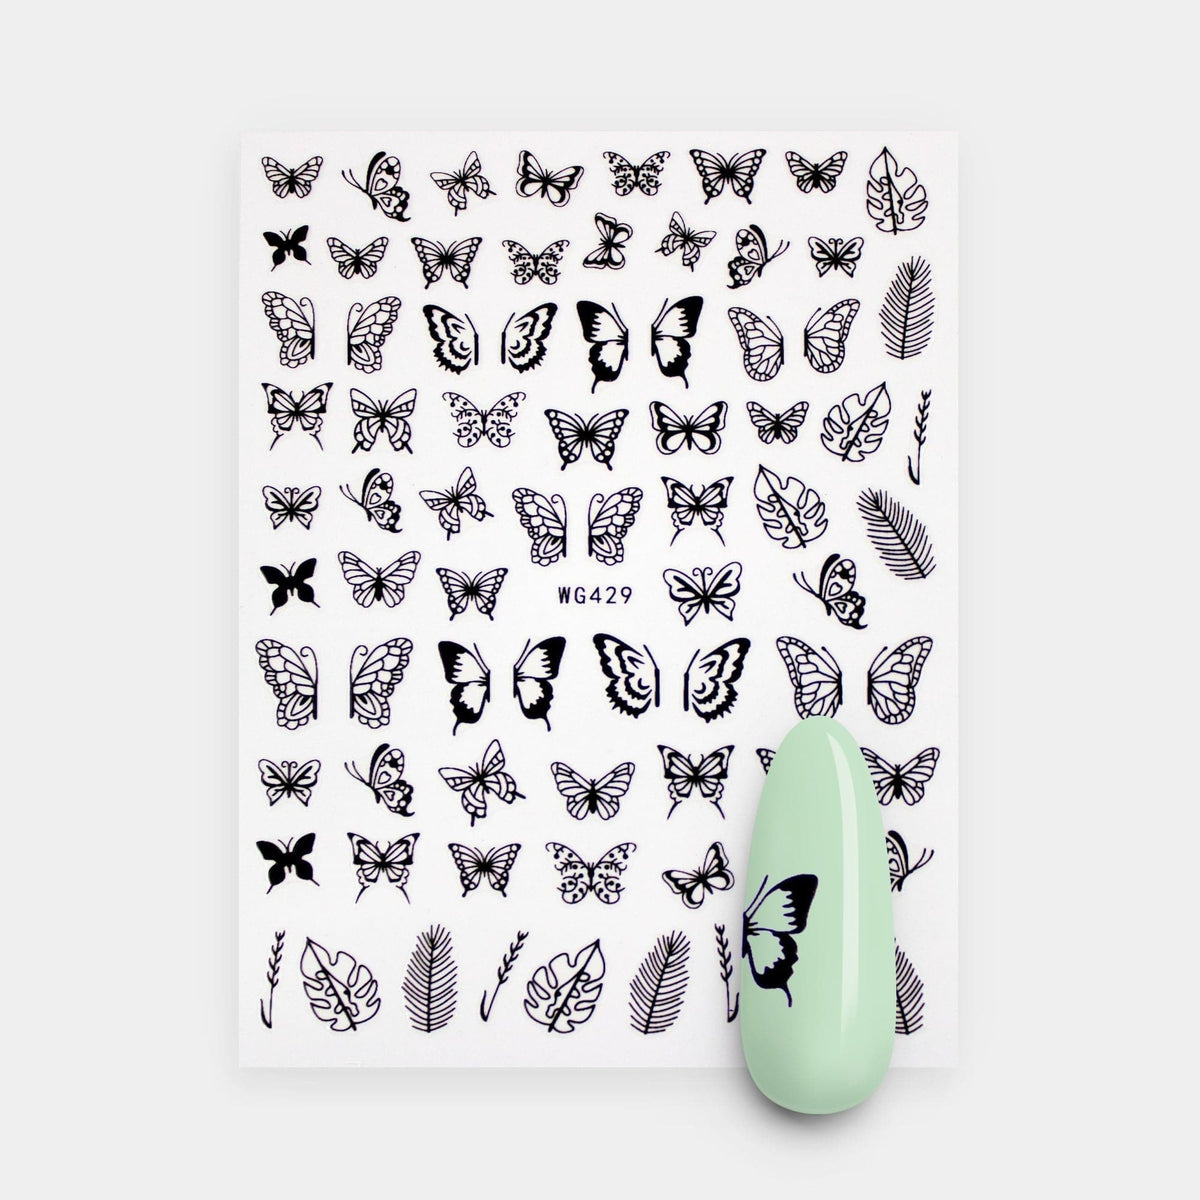 Gelous Black Butterflies Nail Art Stickers product photo - photographed in Australia